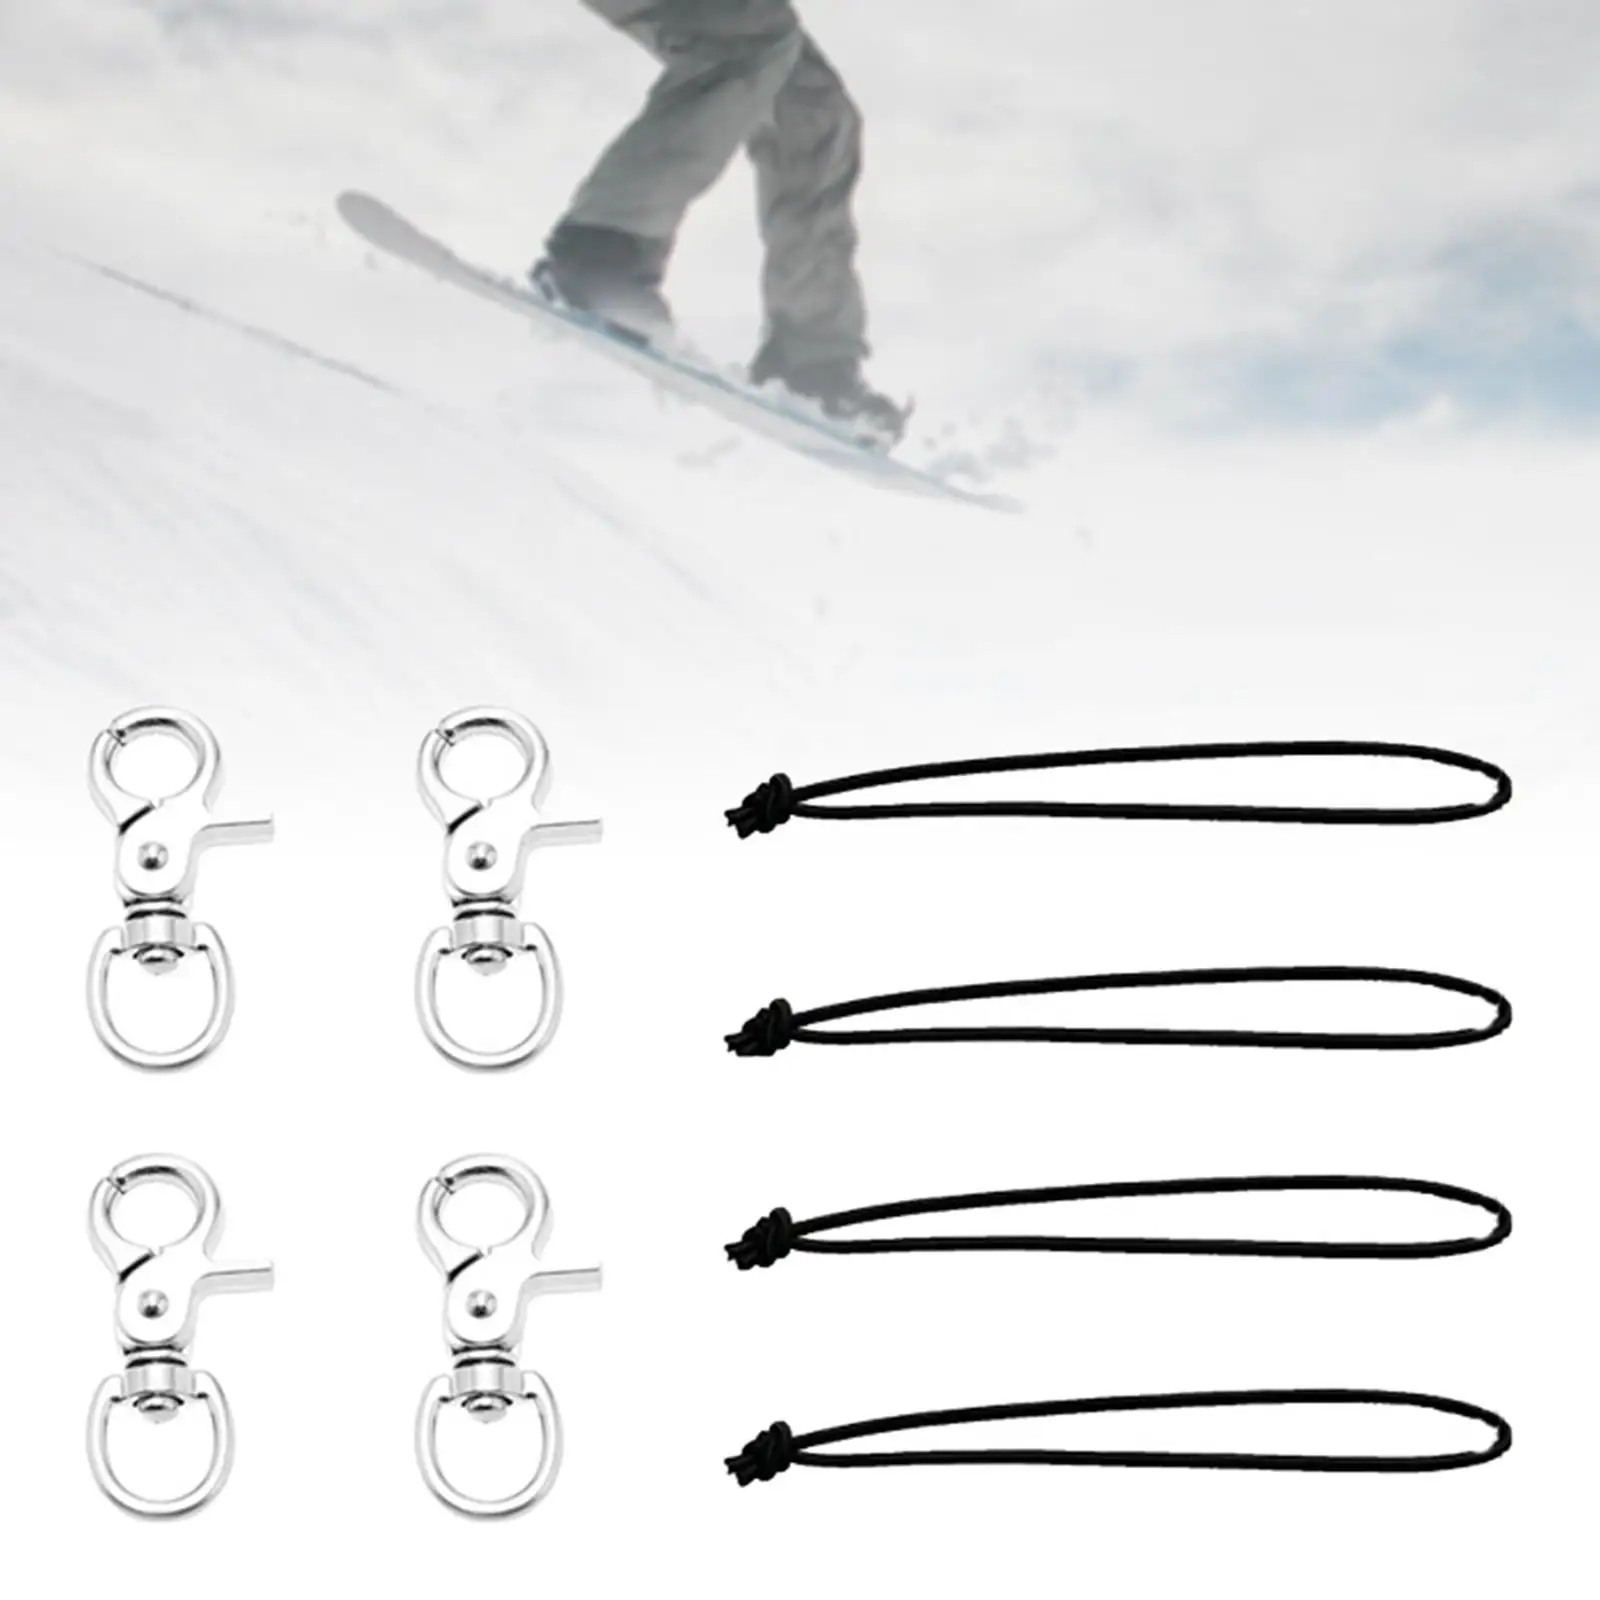 4x Practical Snowboard Leash Cord Multifunctional Tents Rope